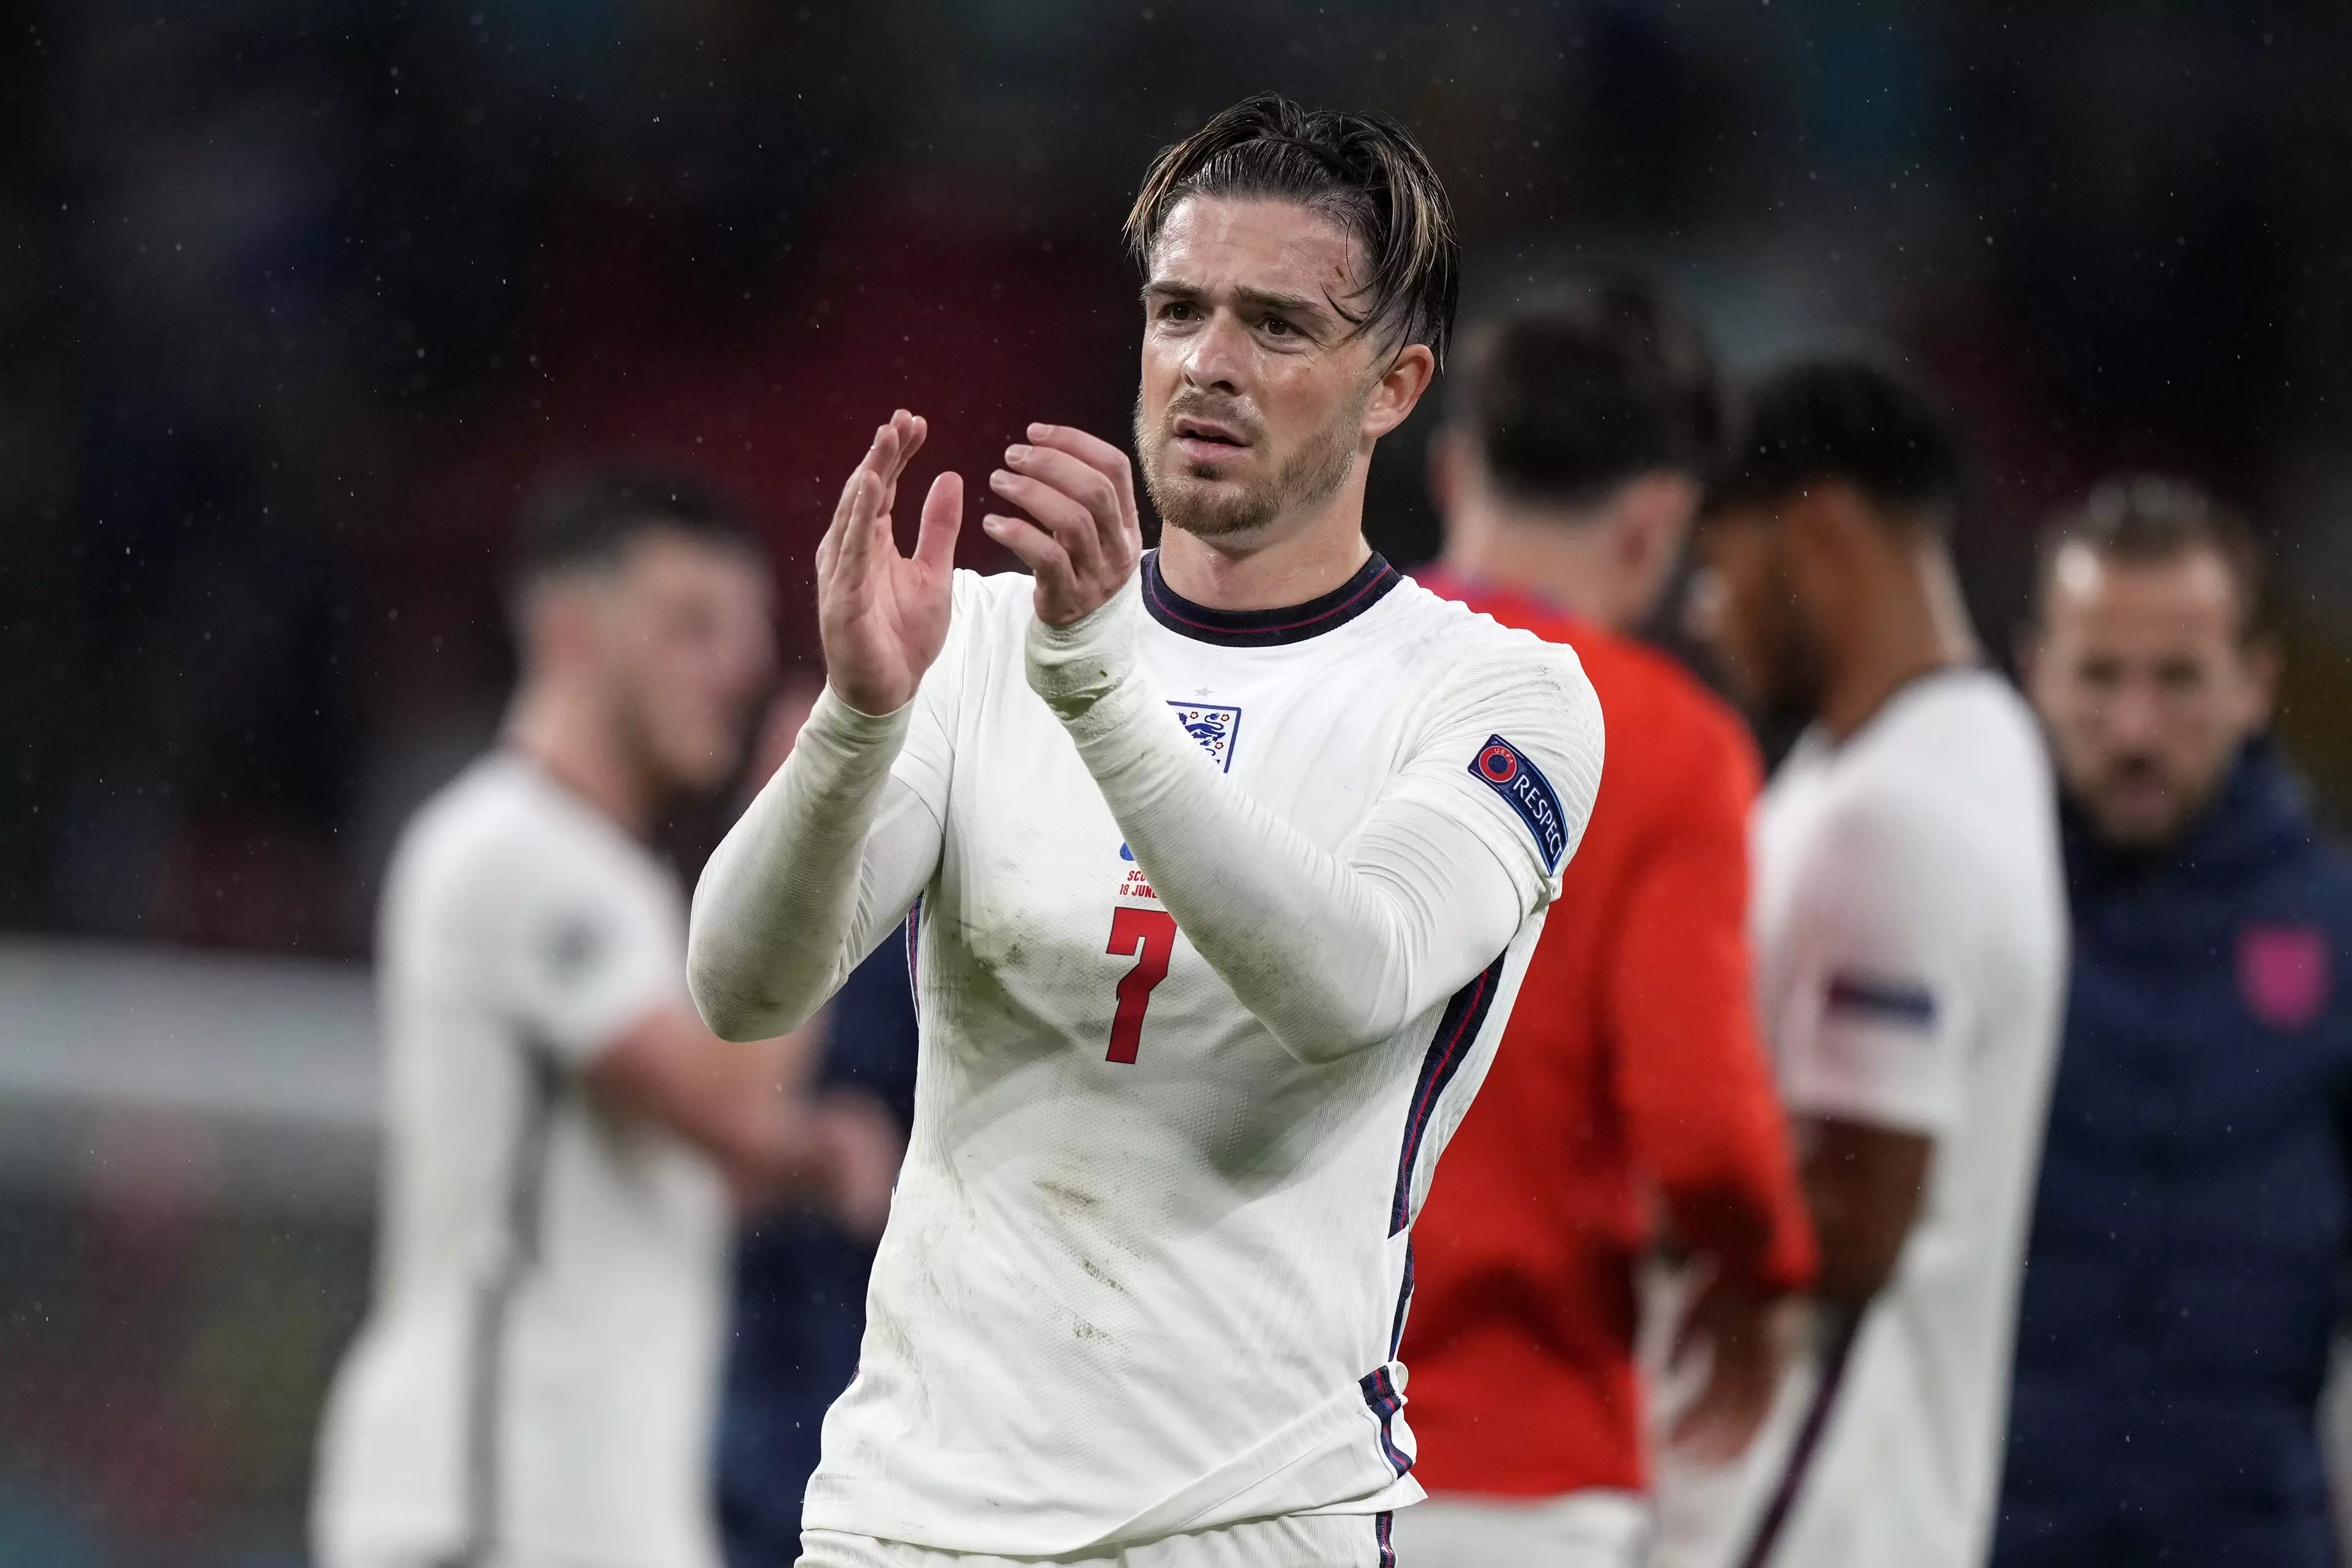 Jack Grealish made his Euro 2020 debut against Scotland in their 0-0 draw on Friday